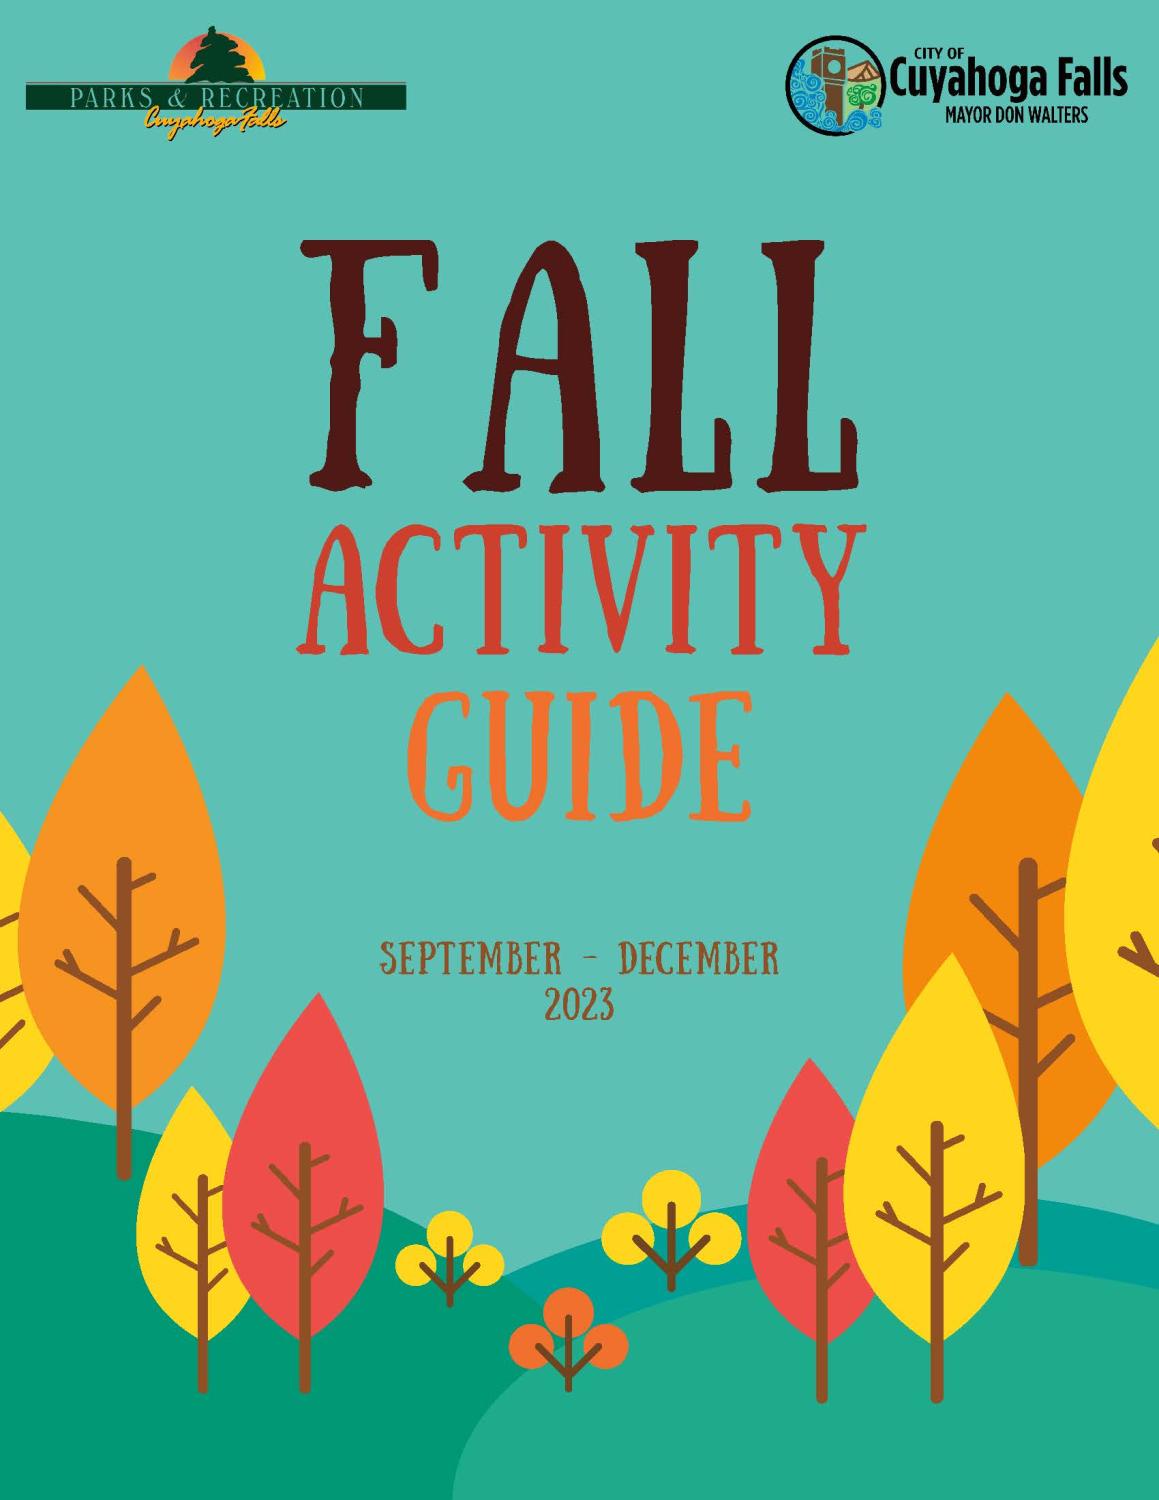 Activity guide